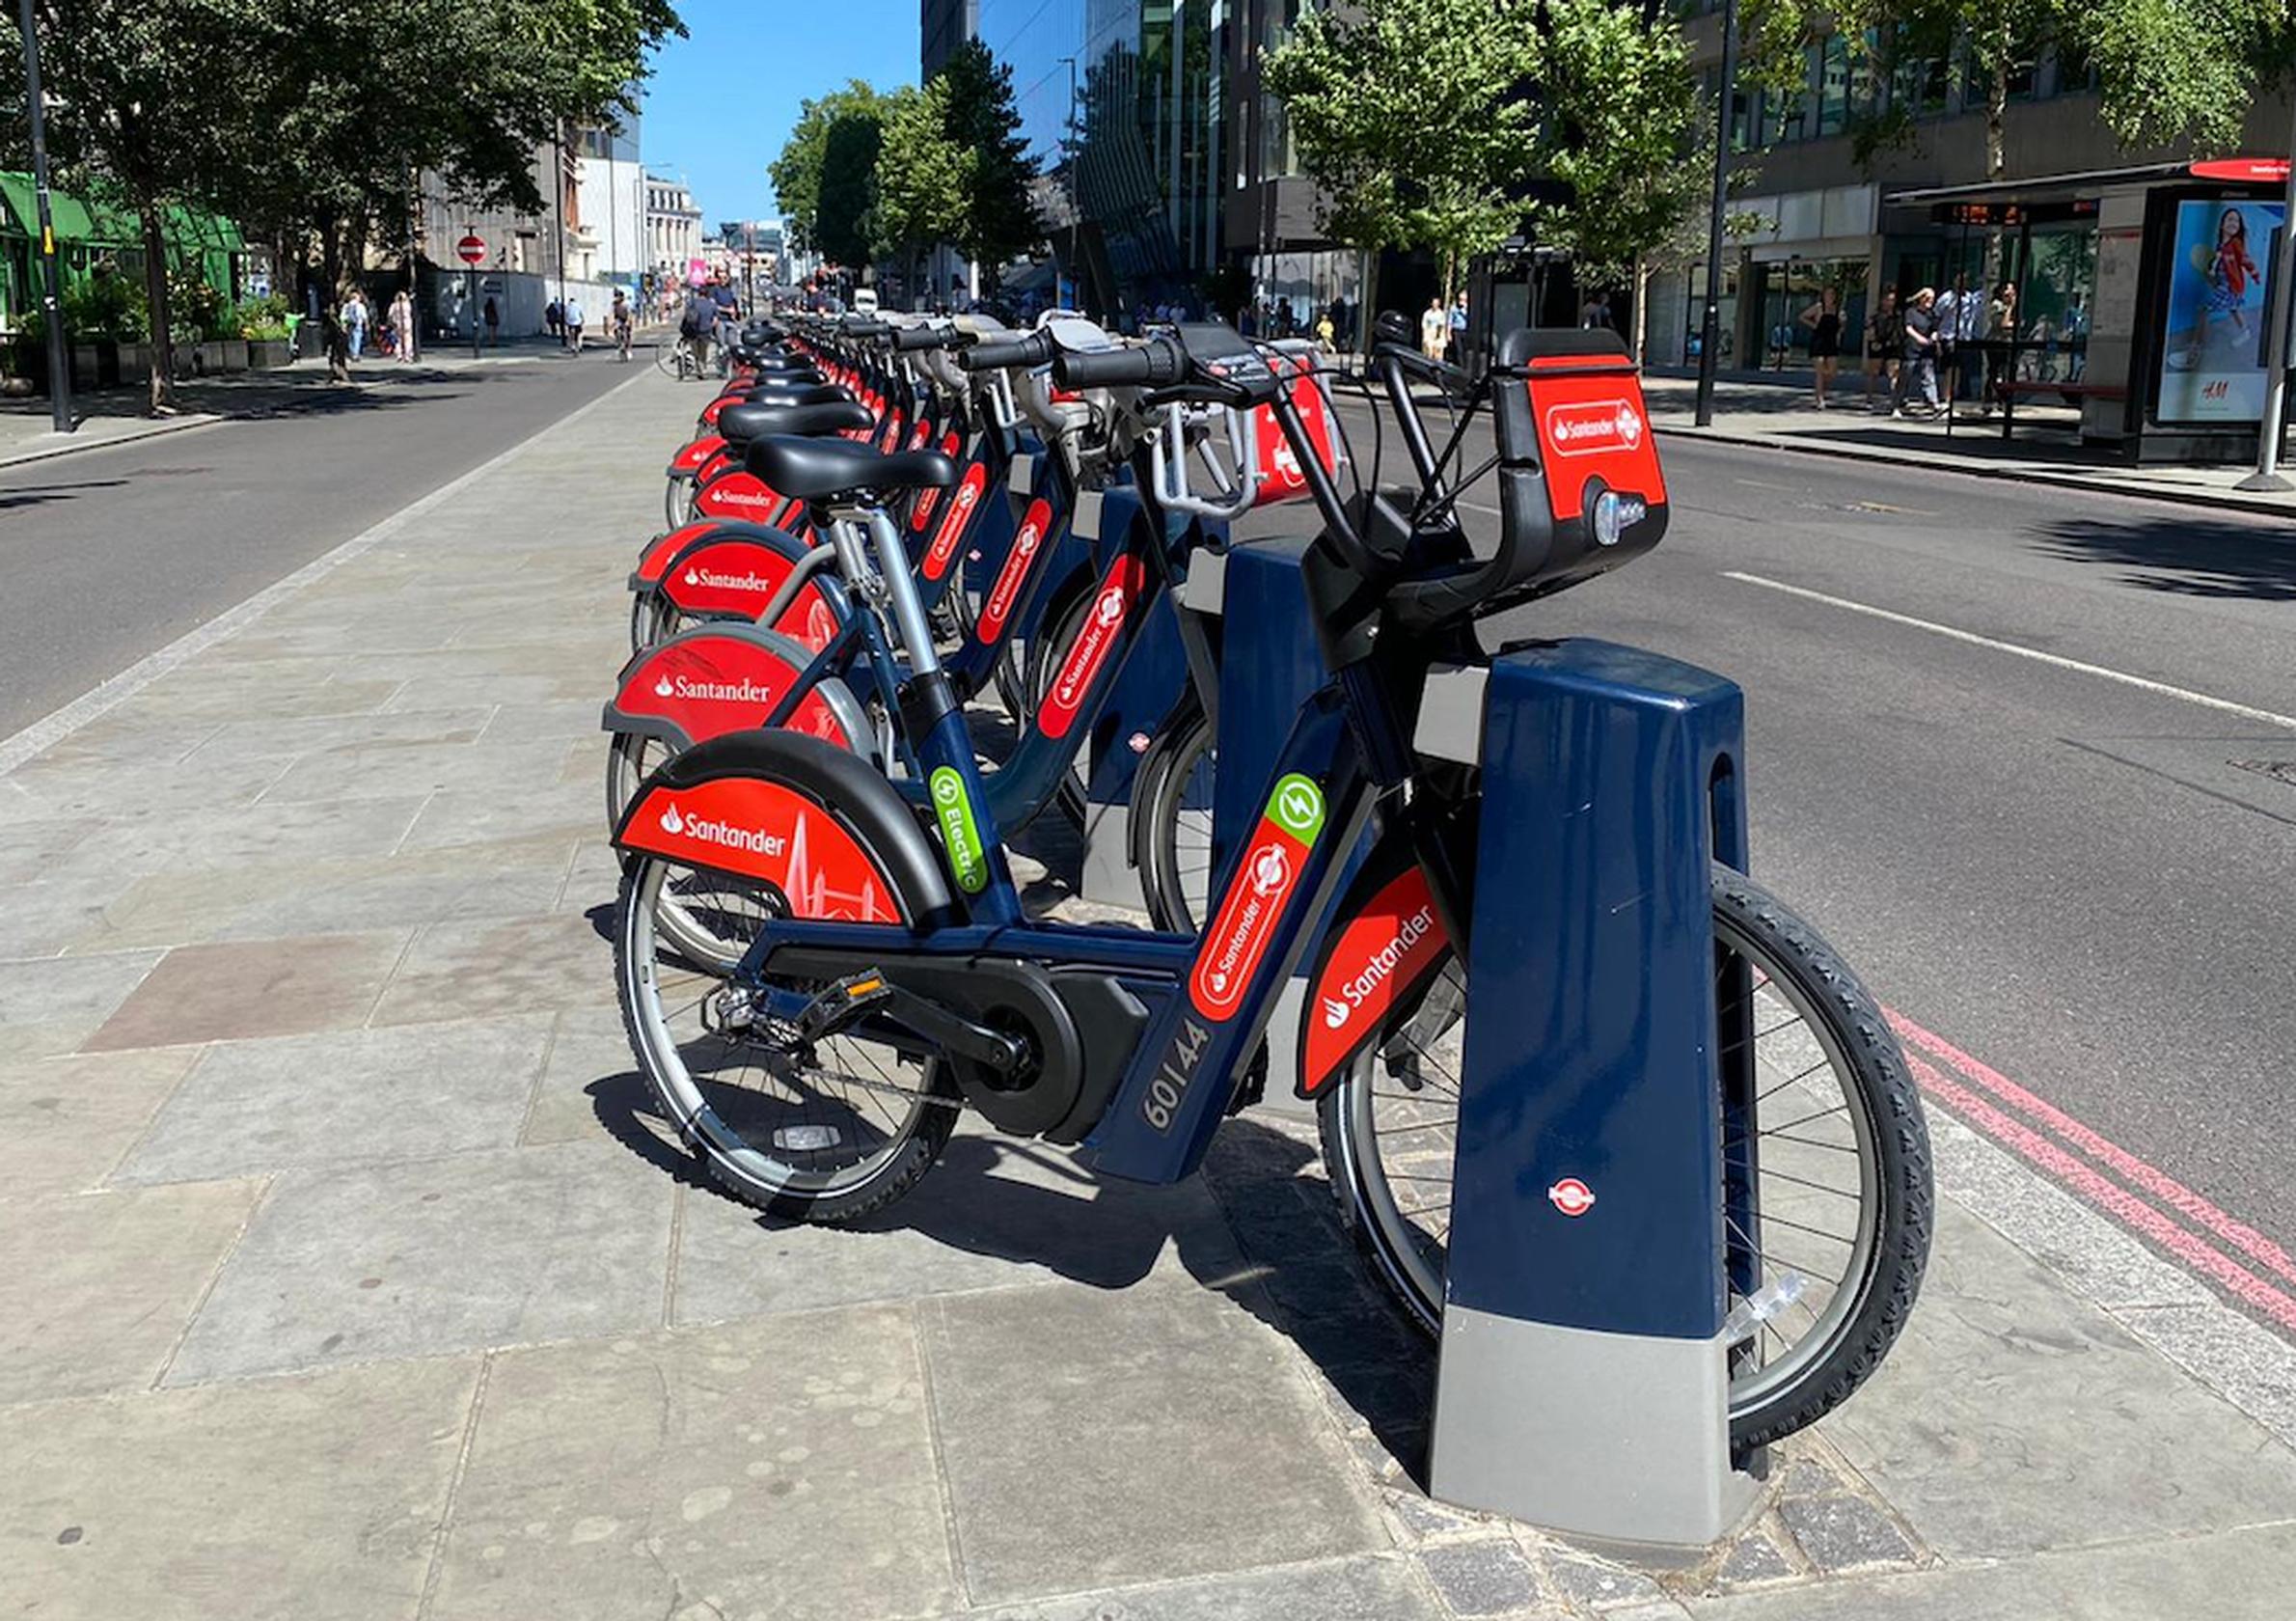 500 e-bikes will be available at Santander Cycles docking stations across central London